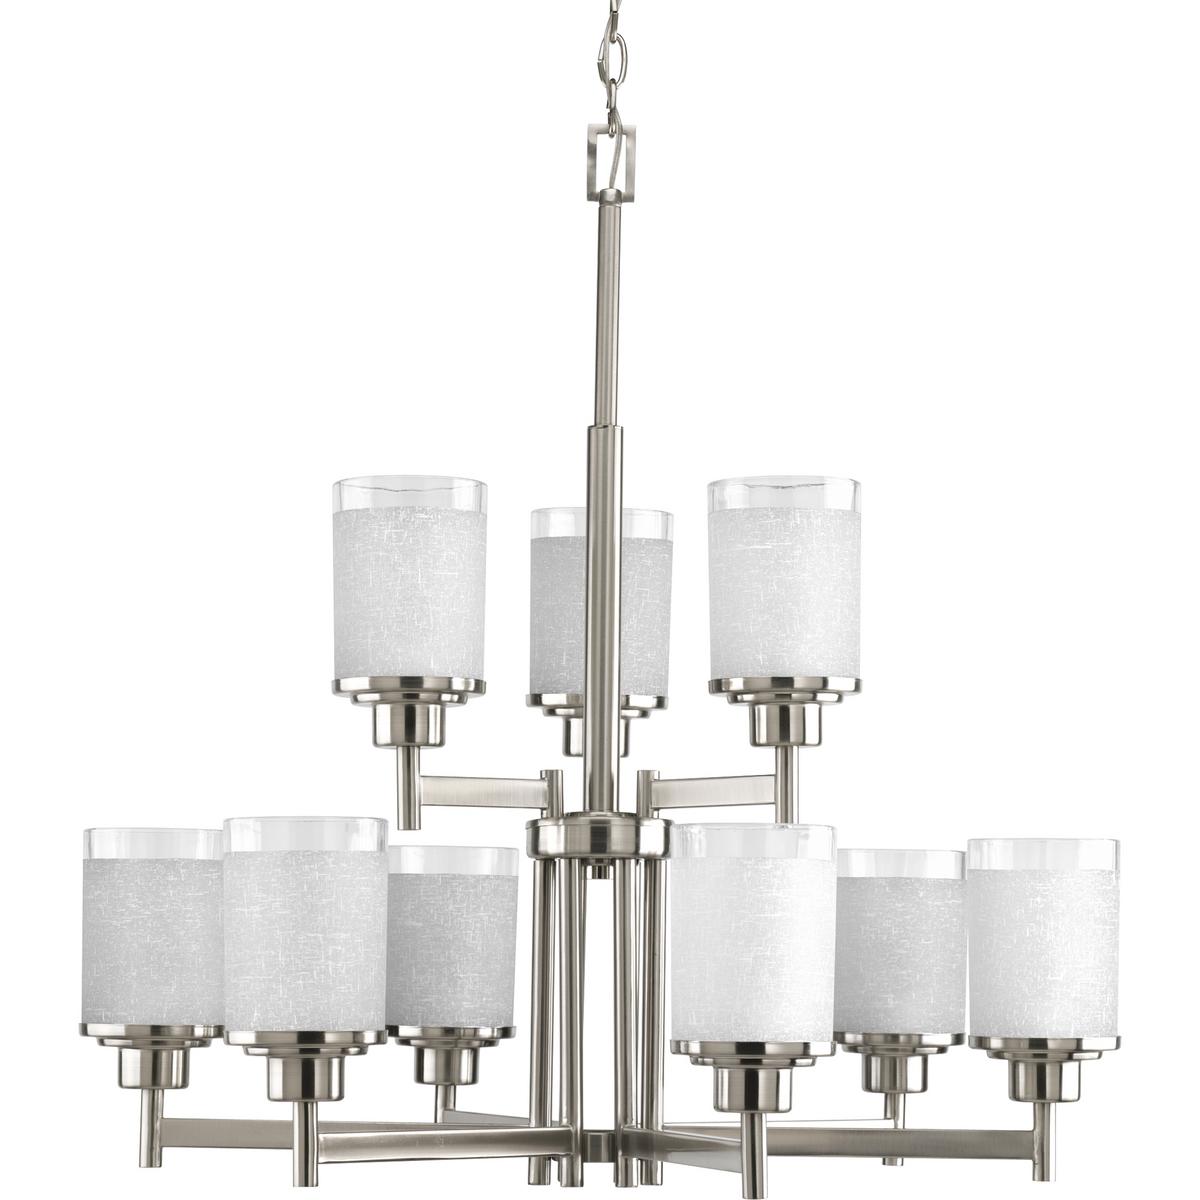 Hubbell P4626-09 Nine-light, 2-tier chandelier features a pleasingly simple Brushed Nickel frame while visually interesting textured white linen glass are complemented by a crisp, clear edge accent. Six feet of 9 gauge chain is supplied for ceiling chain mount. Create the